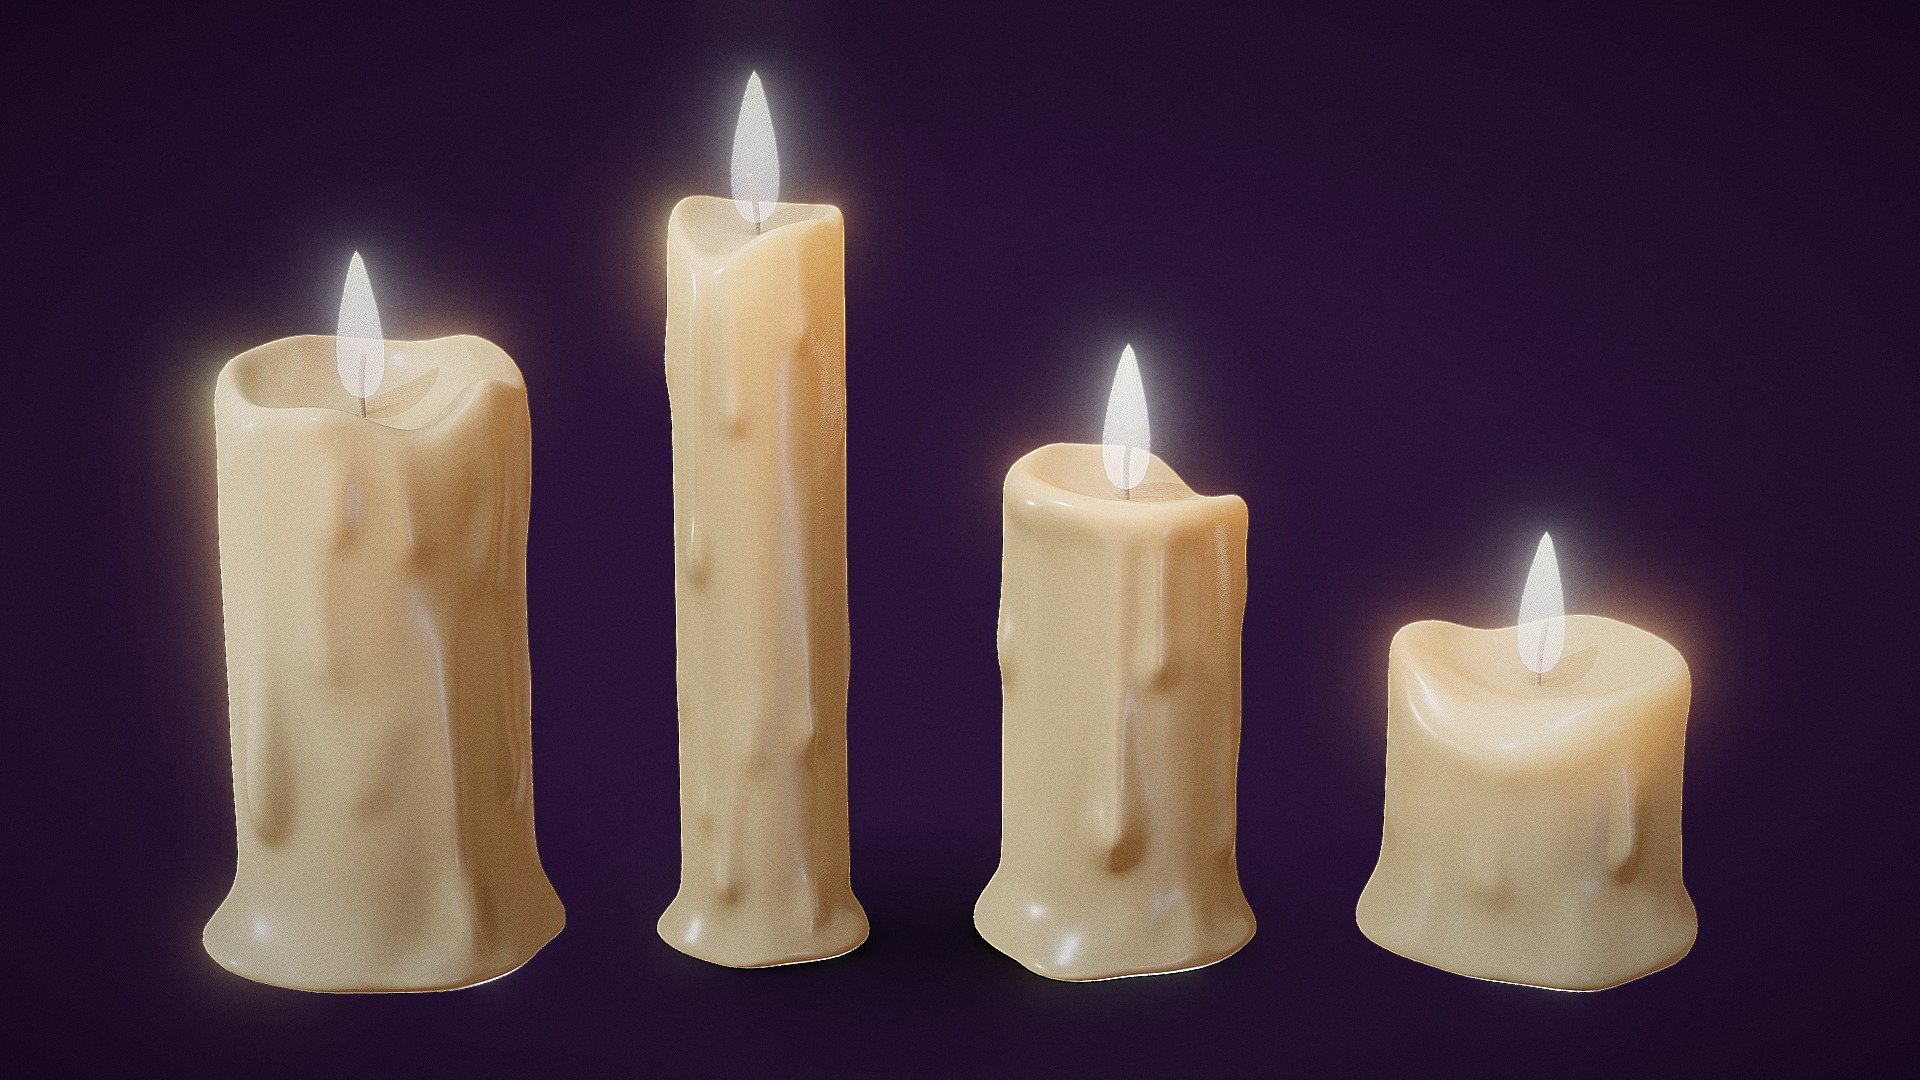 A small set of 4 wax candles.
Low-poly, textures 2048x2048, PBR.
4 Candles - 26k Tris, 13k Polys.
1 Material 3d model